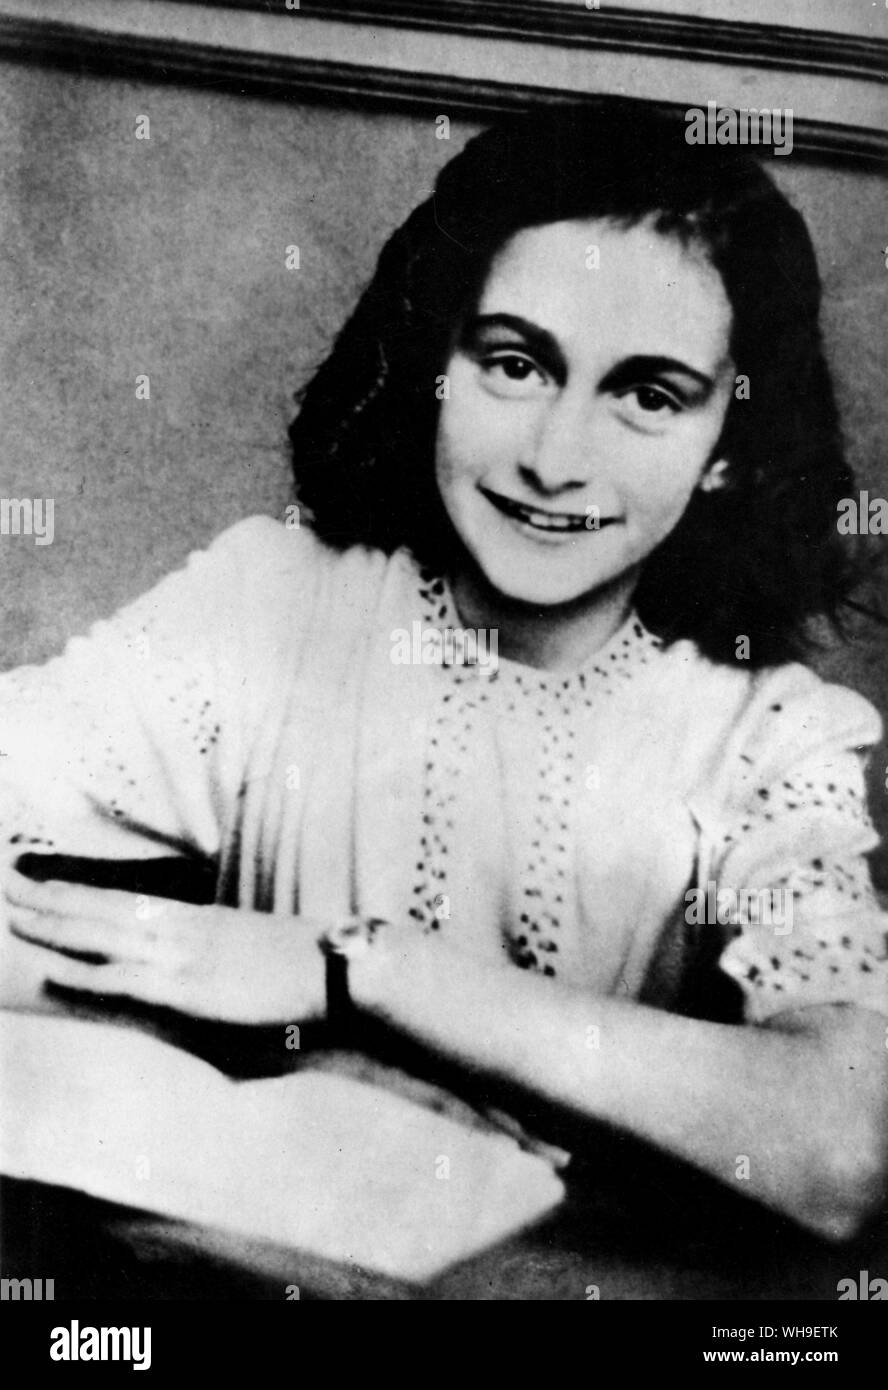 Anne Frank (Annelise Marie) (1929-1945). German diarist. She fled to the Netherlands with her family in 1933 to escape the persecution of the Nazis. Stock Photo